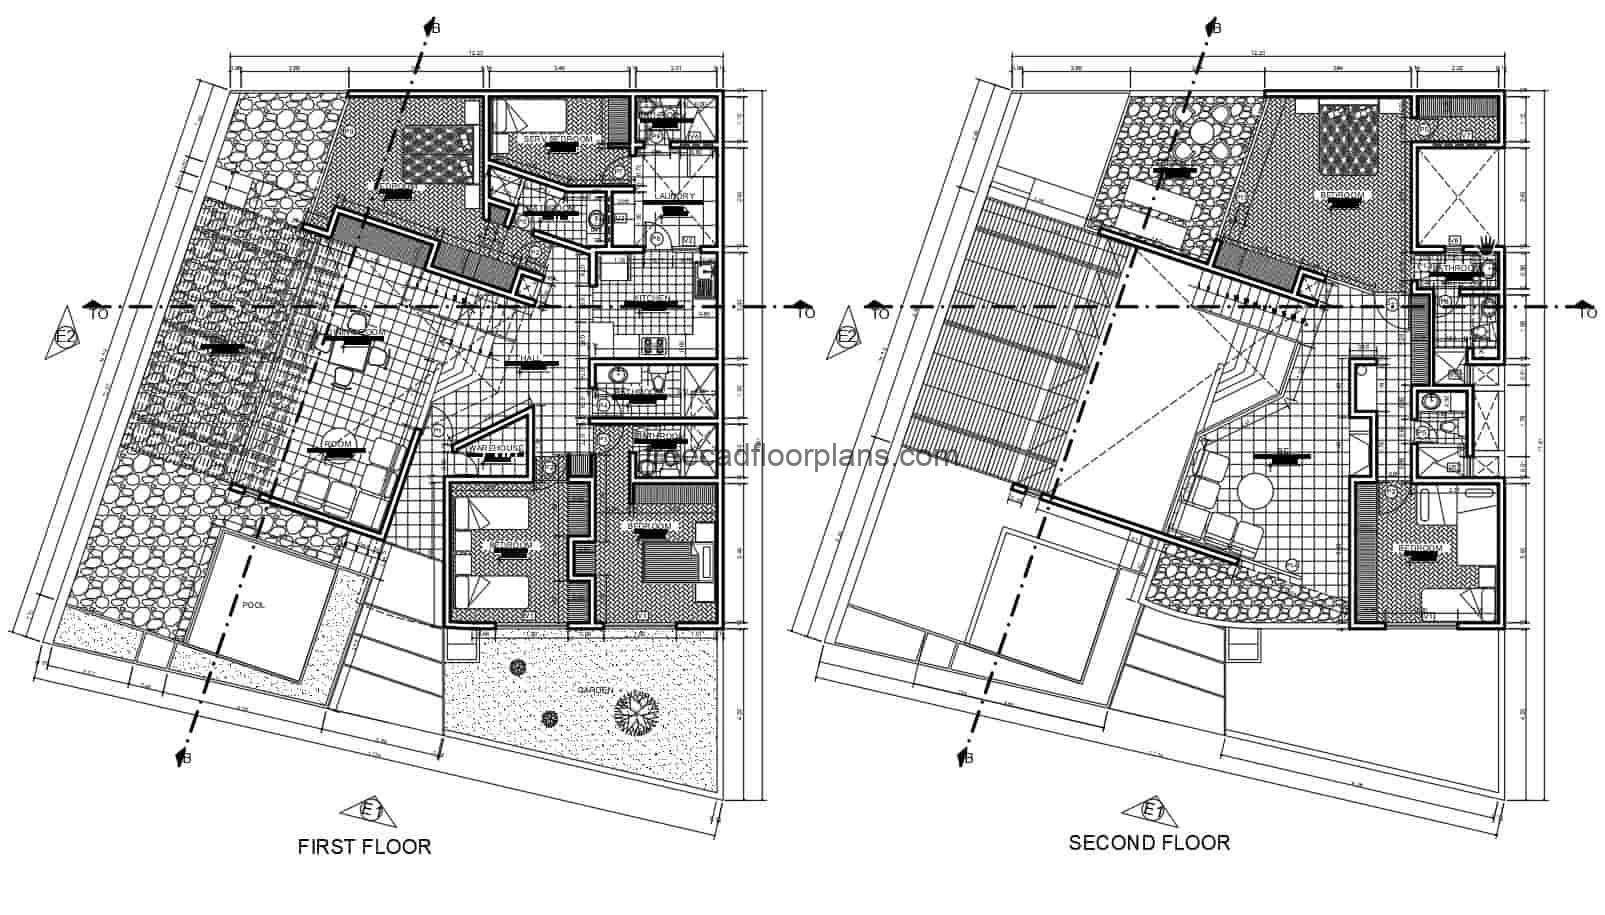 DWG drawings of plans, elevations, sections and details of a two-story house located at the edge of the beach, modern style floor plan.